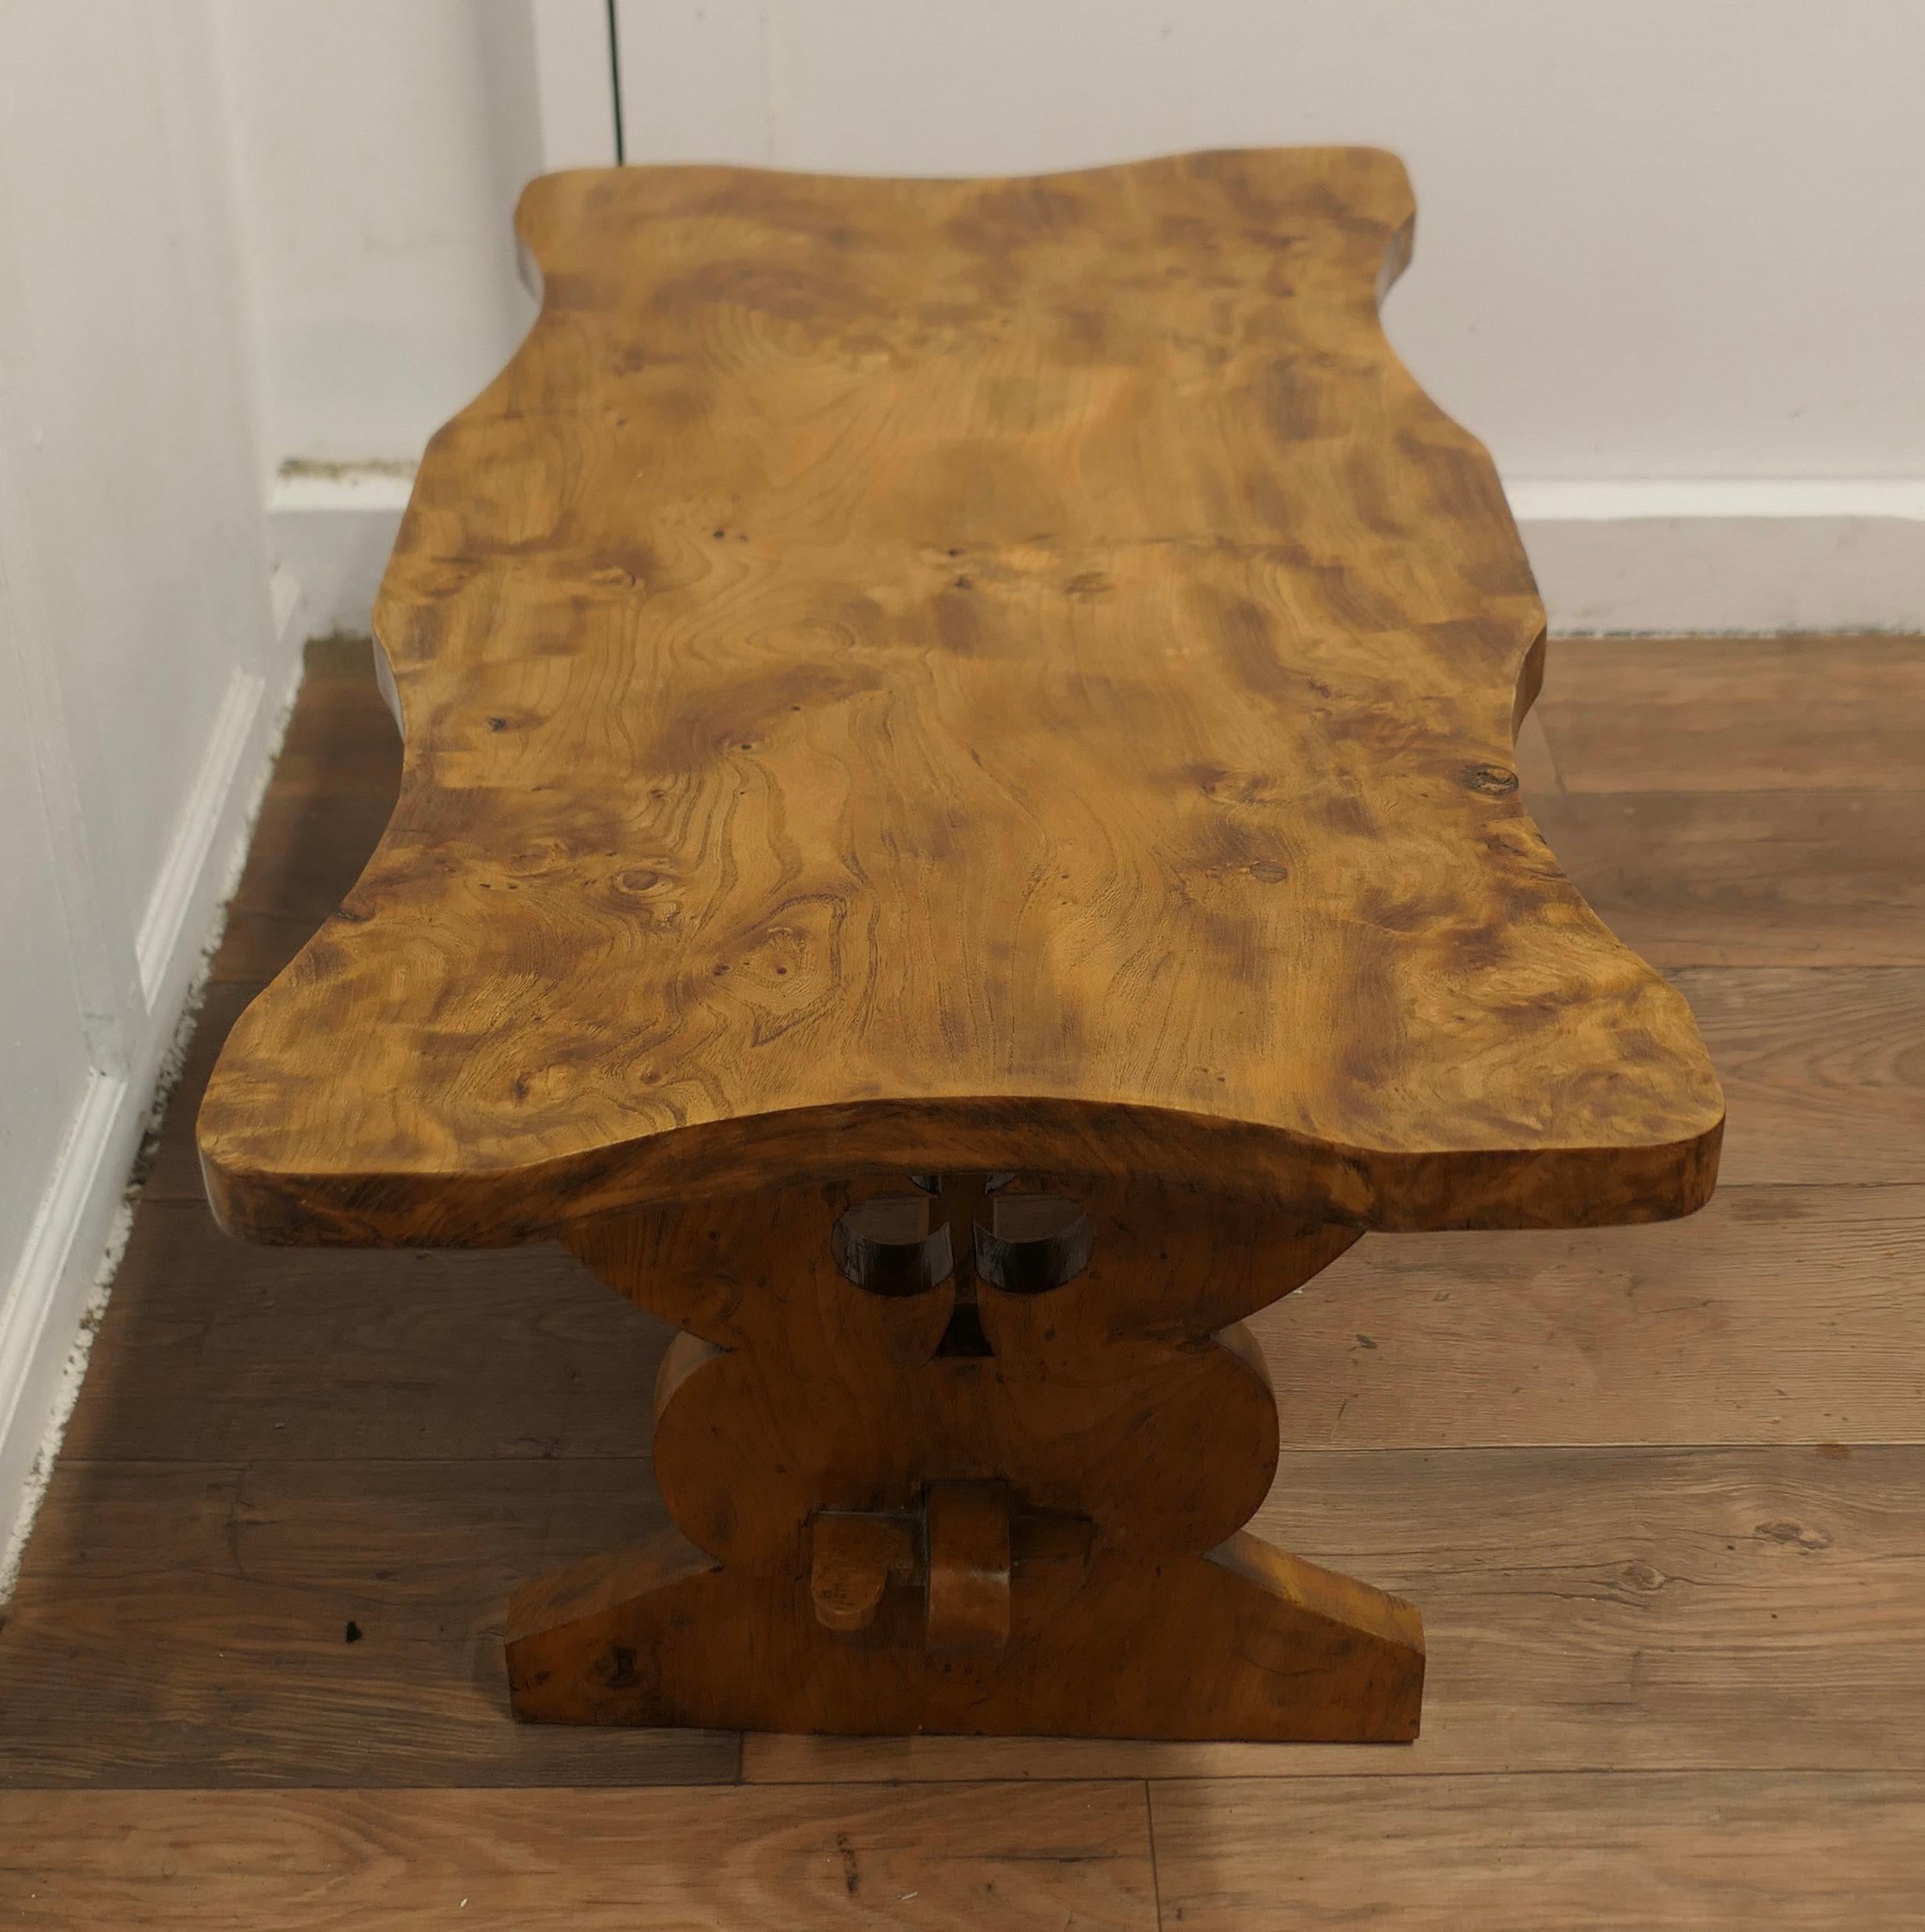 A Chunky Solid Elm Irish Coffee Table

This is a very sturdy table, made in the Farmhouse refectory style, it is made in solid elm in a scalloped shape which has a superb patina and an attractive grain it has a thick top and chunky legs carved with